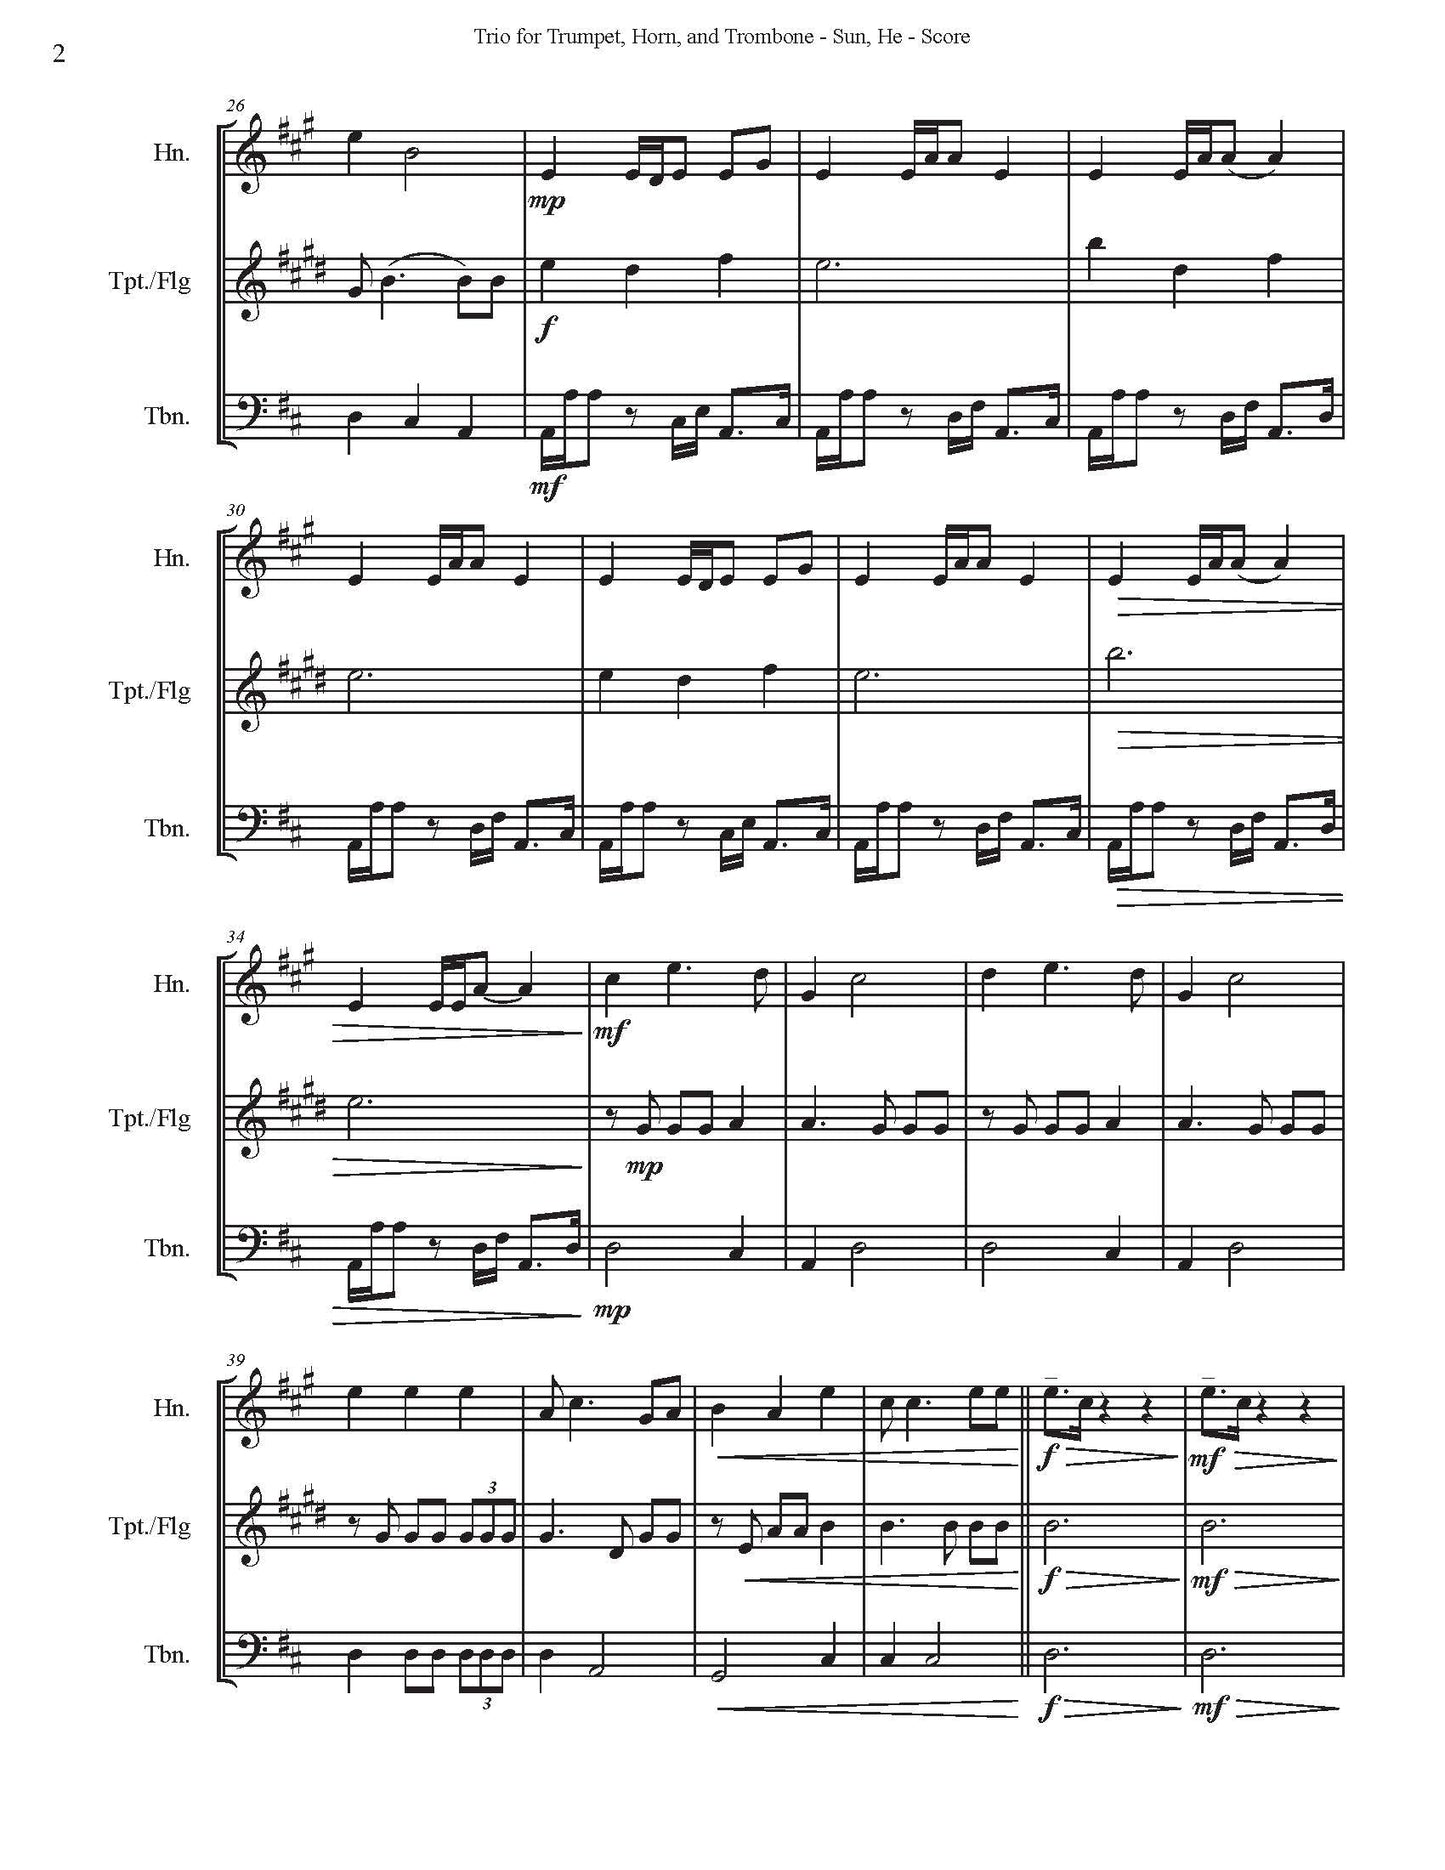 He Trio for Trumpet, Horn, and Trombone DOWNLOAD